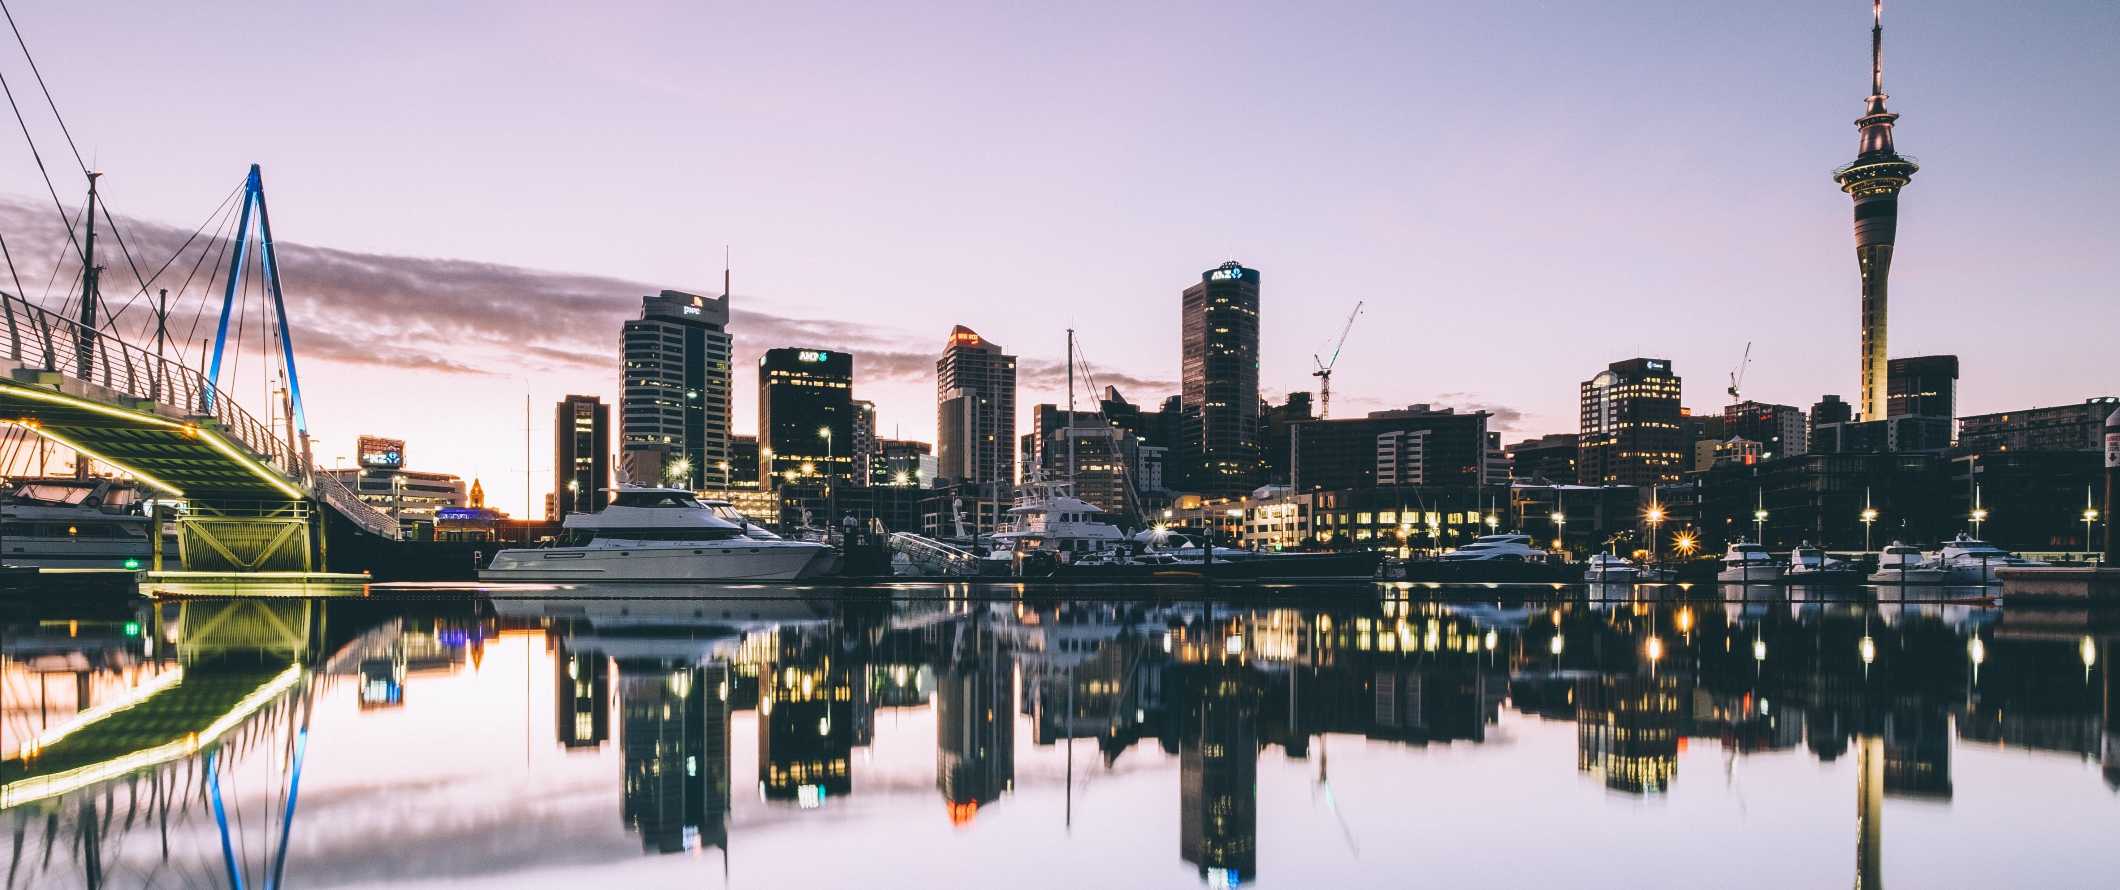 Auckland's harborfront at sunset in New Zealand.